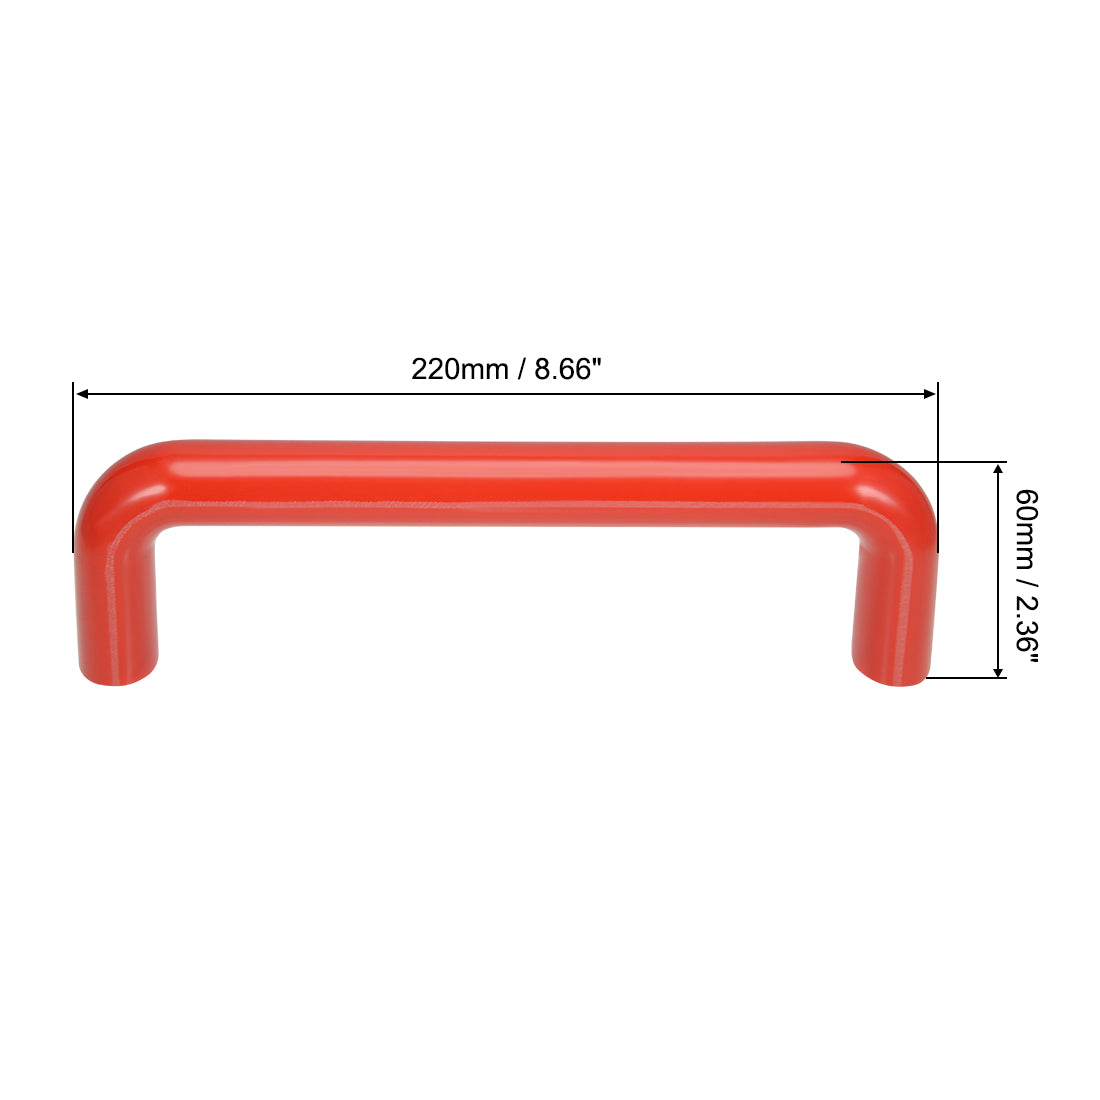 uxcell Uxcell Bakelite Plastic Pulls Handle 200mm Hole Centers Red for Industrial Machine